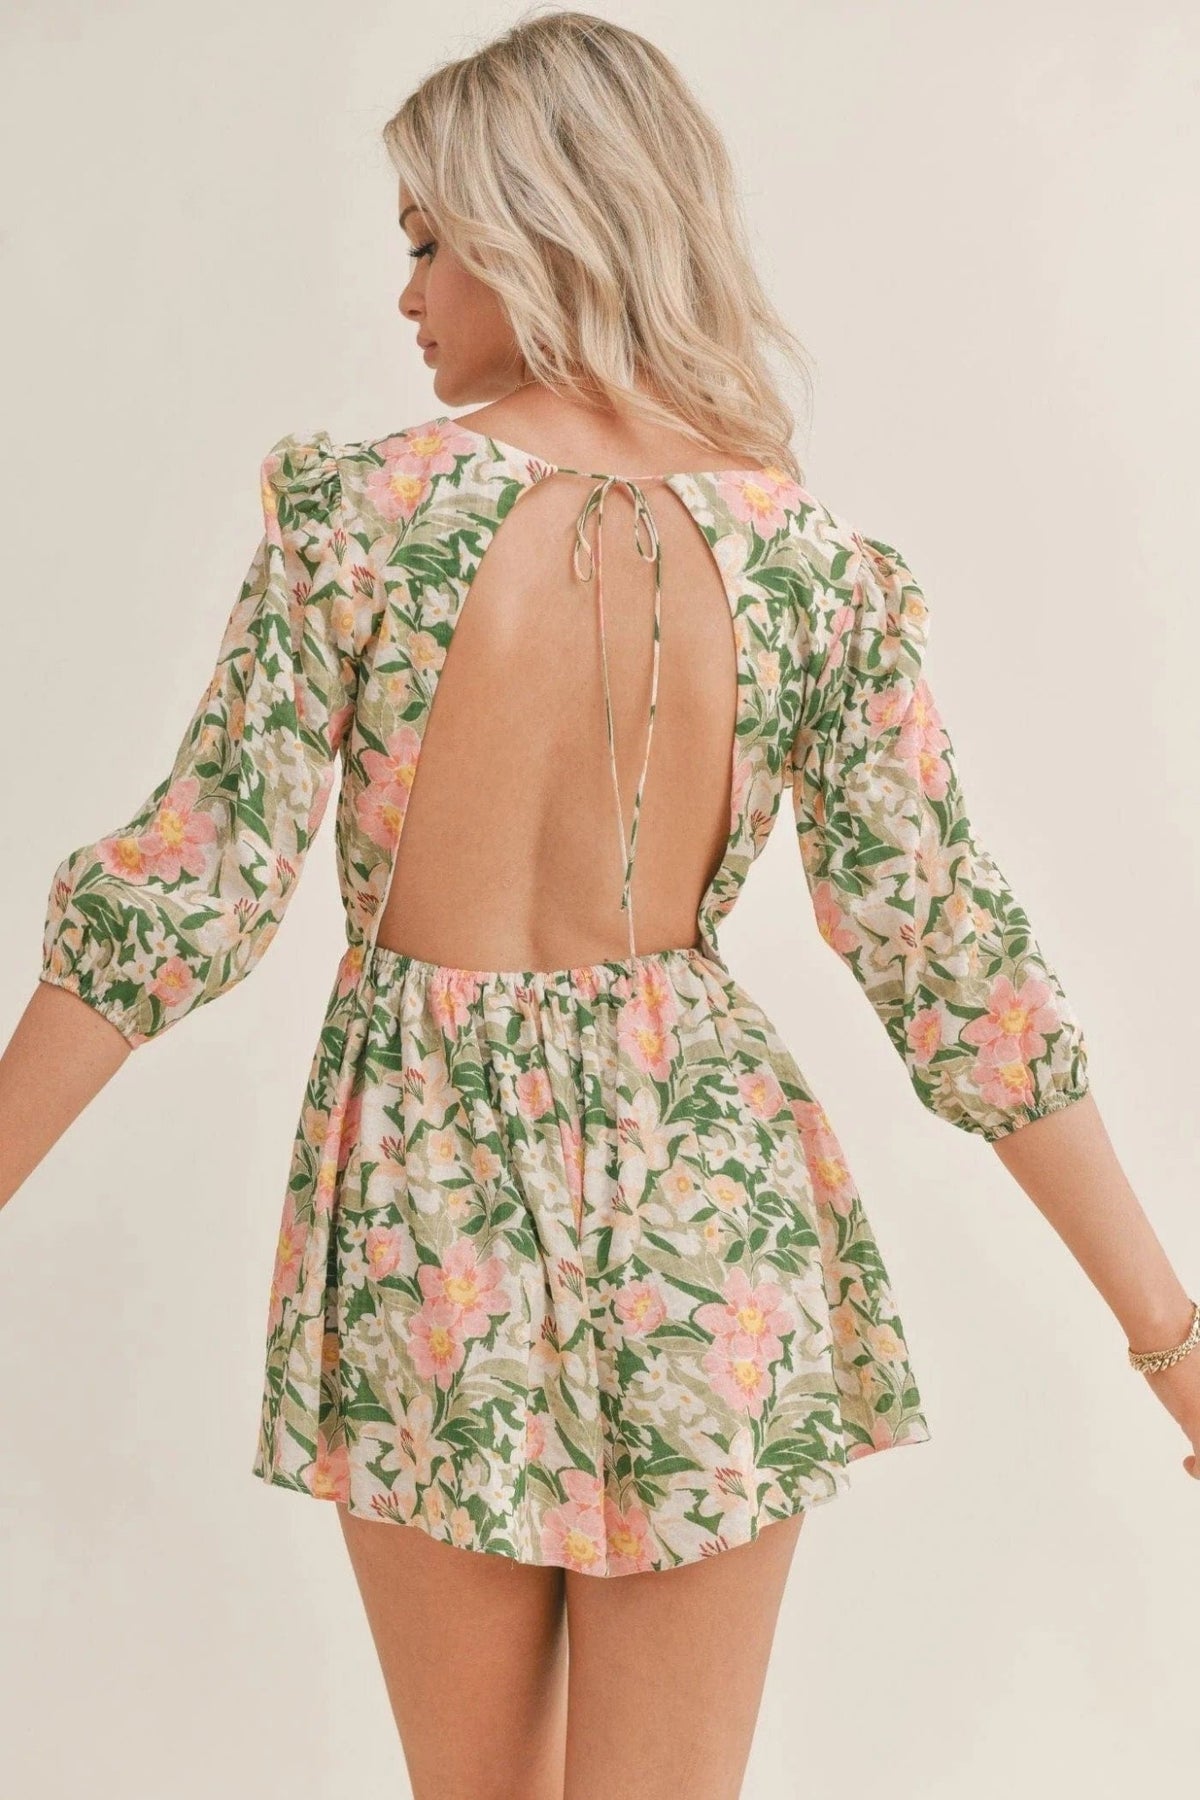 Sage the Label Romper for Sale - Romper - Blooming Daily